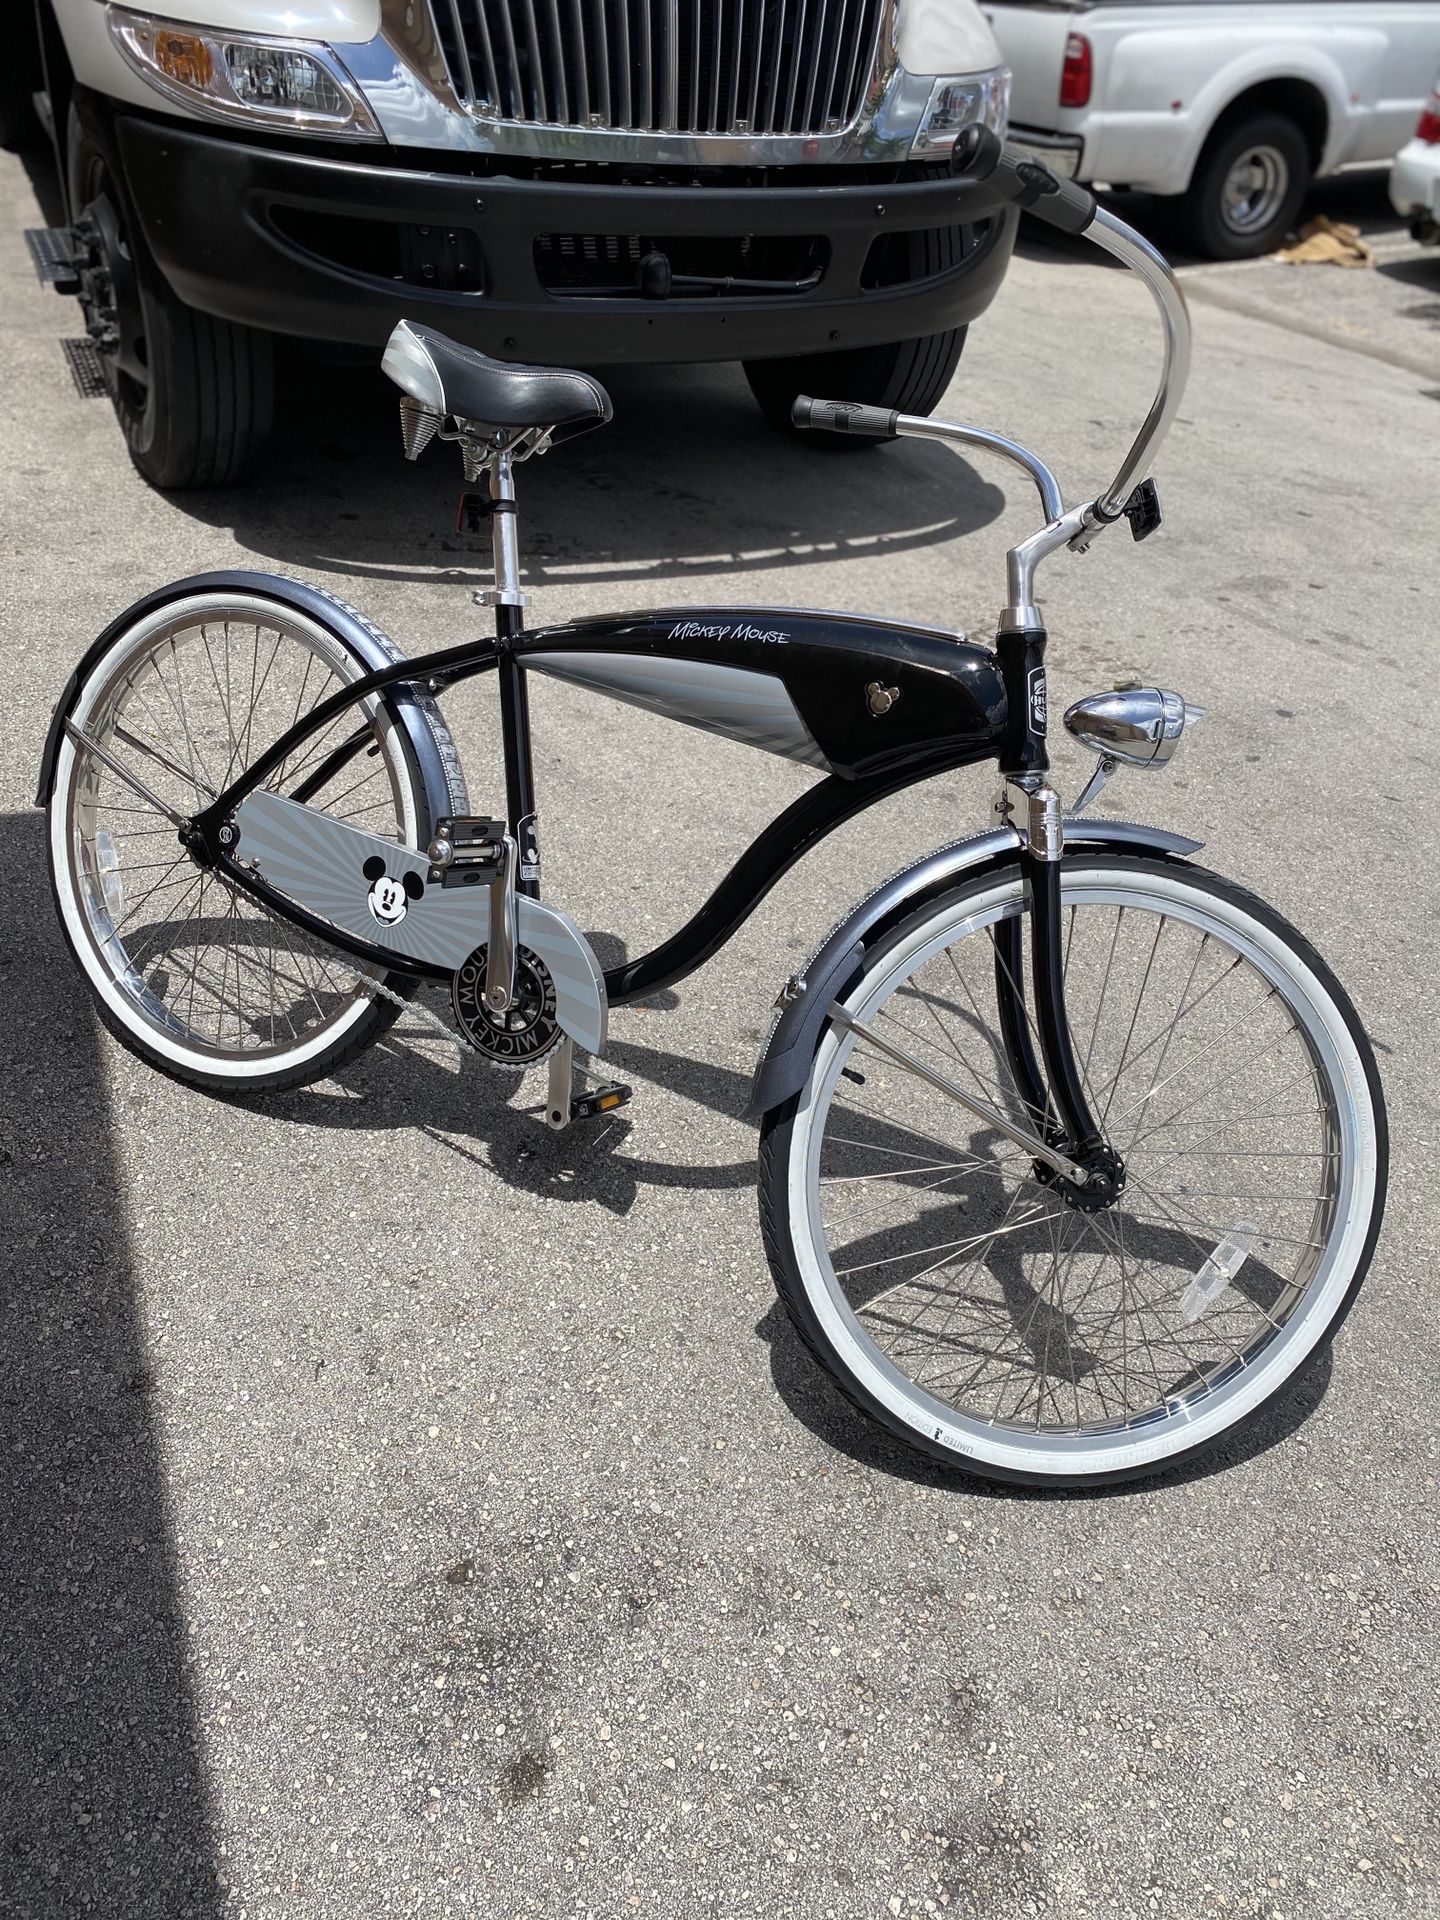 Limited Edition Disney Mickey Mouse Cruiser Bike